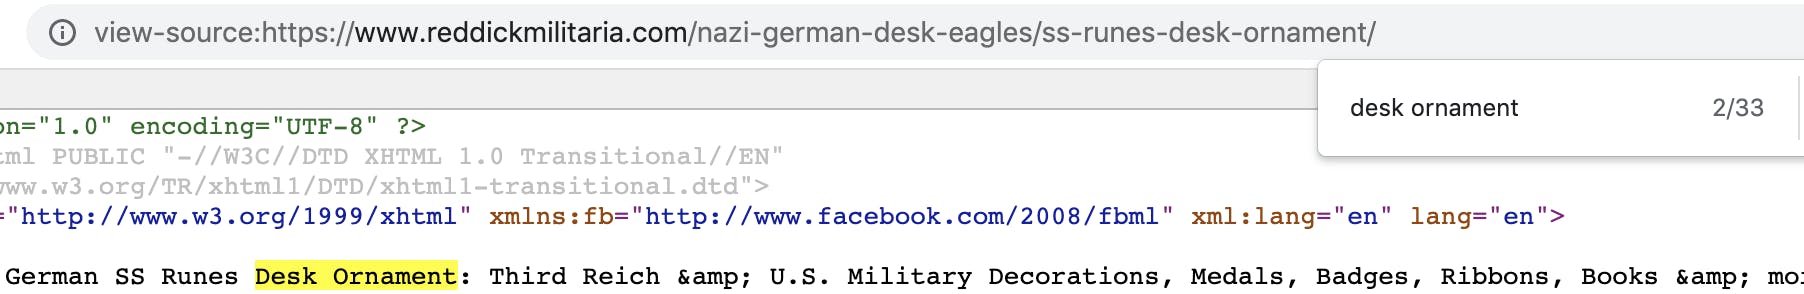 Screenshot of a Nazi memorabilia sales site in HTML view showing that there are 33 occurrence of 'desk ornament' found on the page